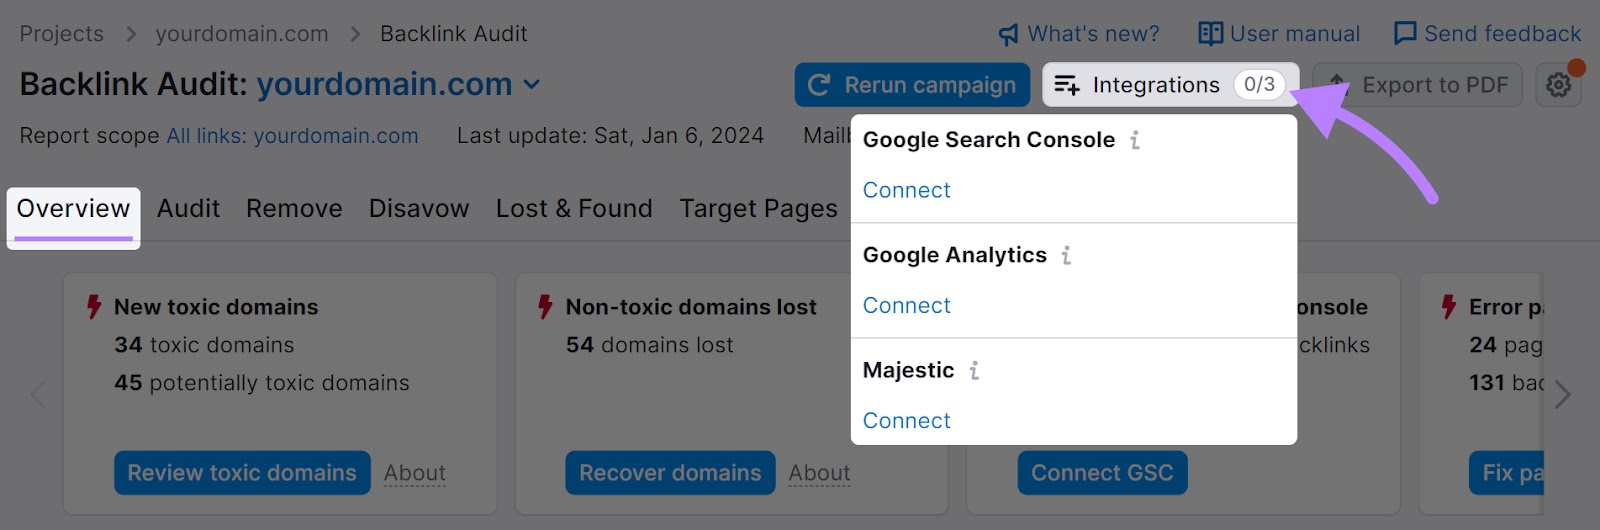 Connect Backlink Audit to Google Search Console under "integrations"